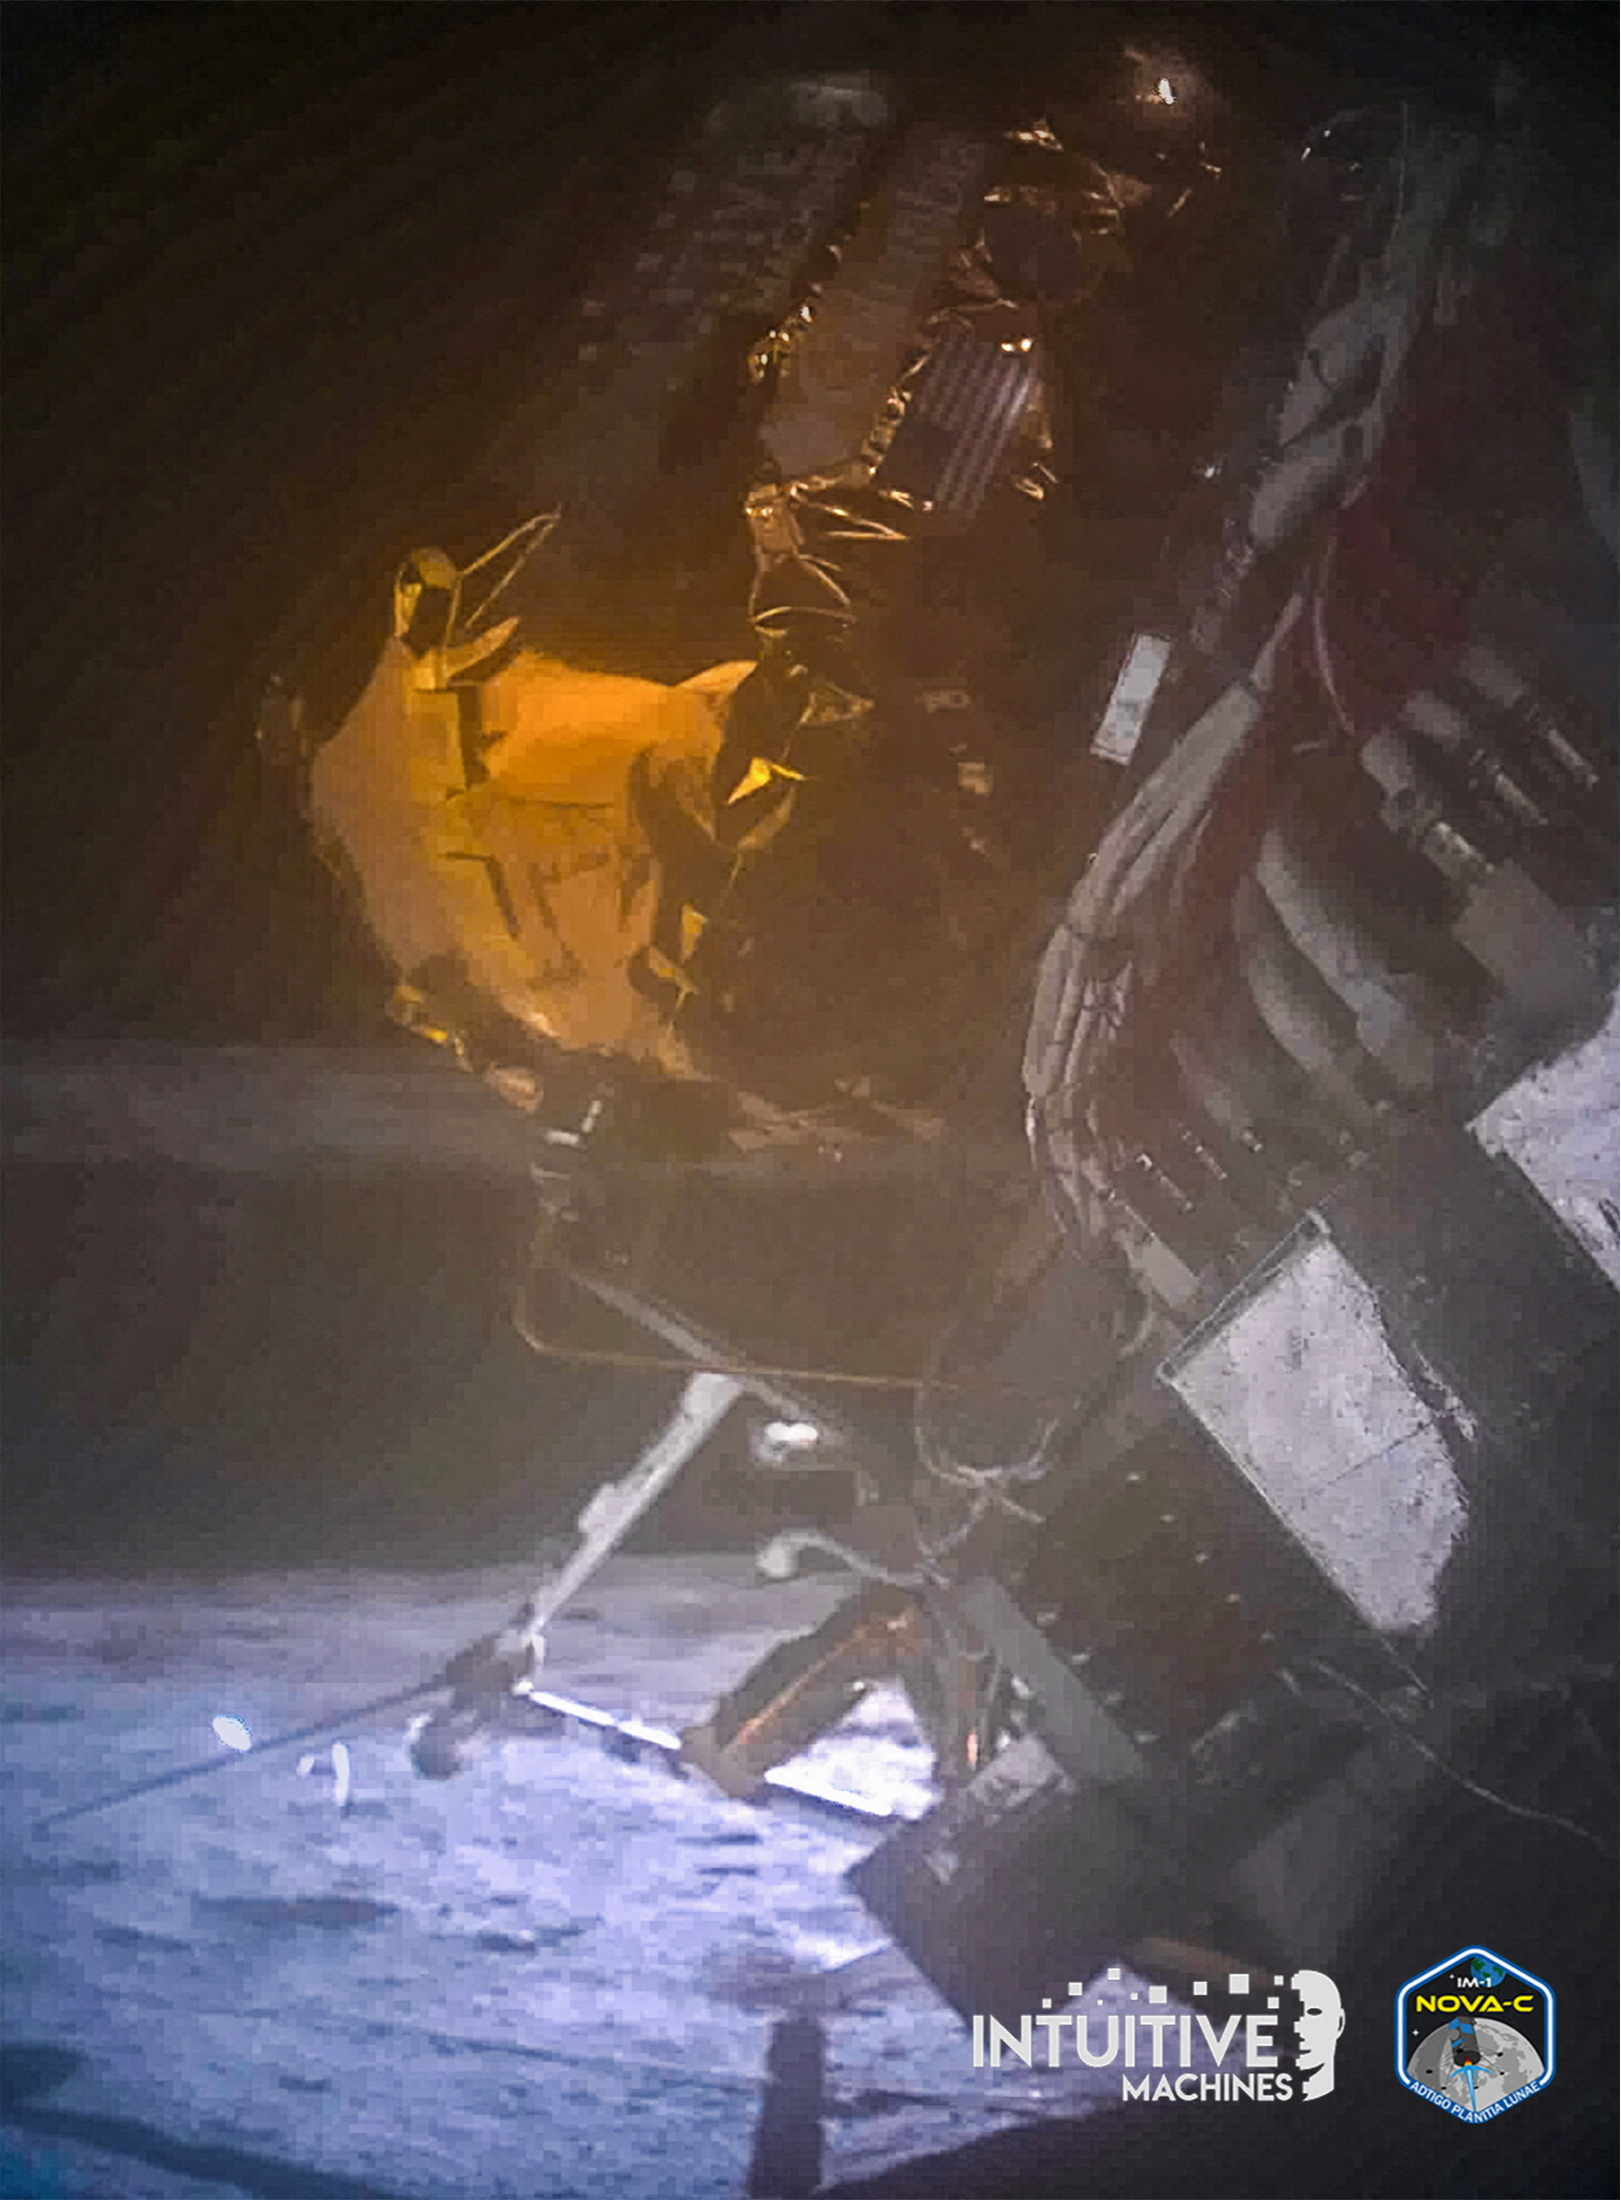 dramatic new photos show odysseus moon lander on its side with snapped leg